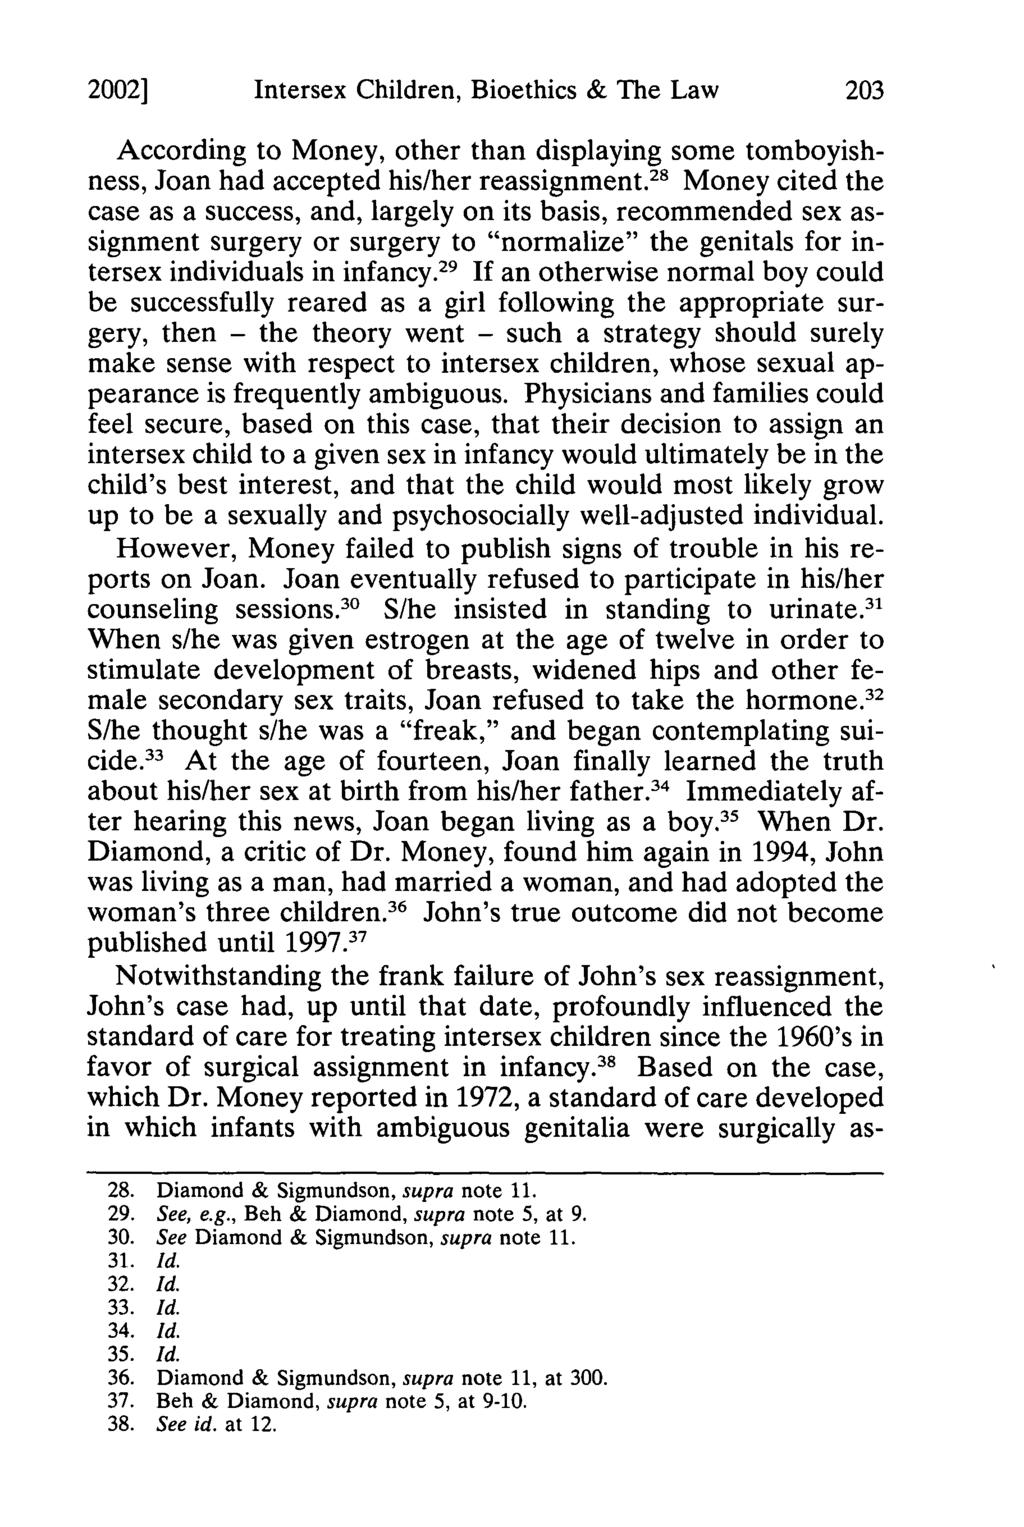 2002] Hermer: Paradigms Revised: Intersex Children, Bioethics & the Law Intersex Children, Bioethics & The Law According to Money, other than displaying some tomboyishness, Joan had accepted his/her